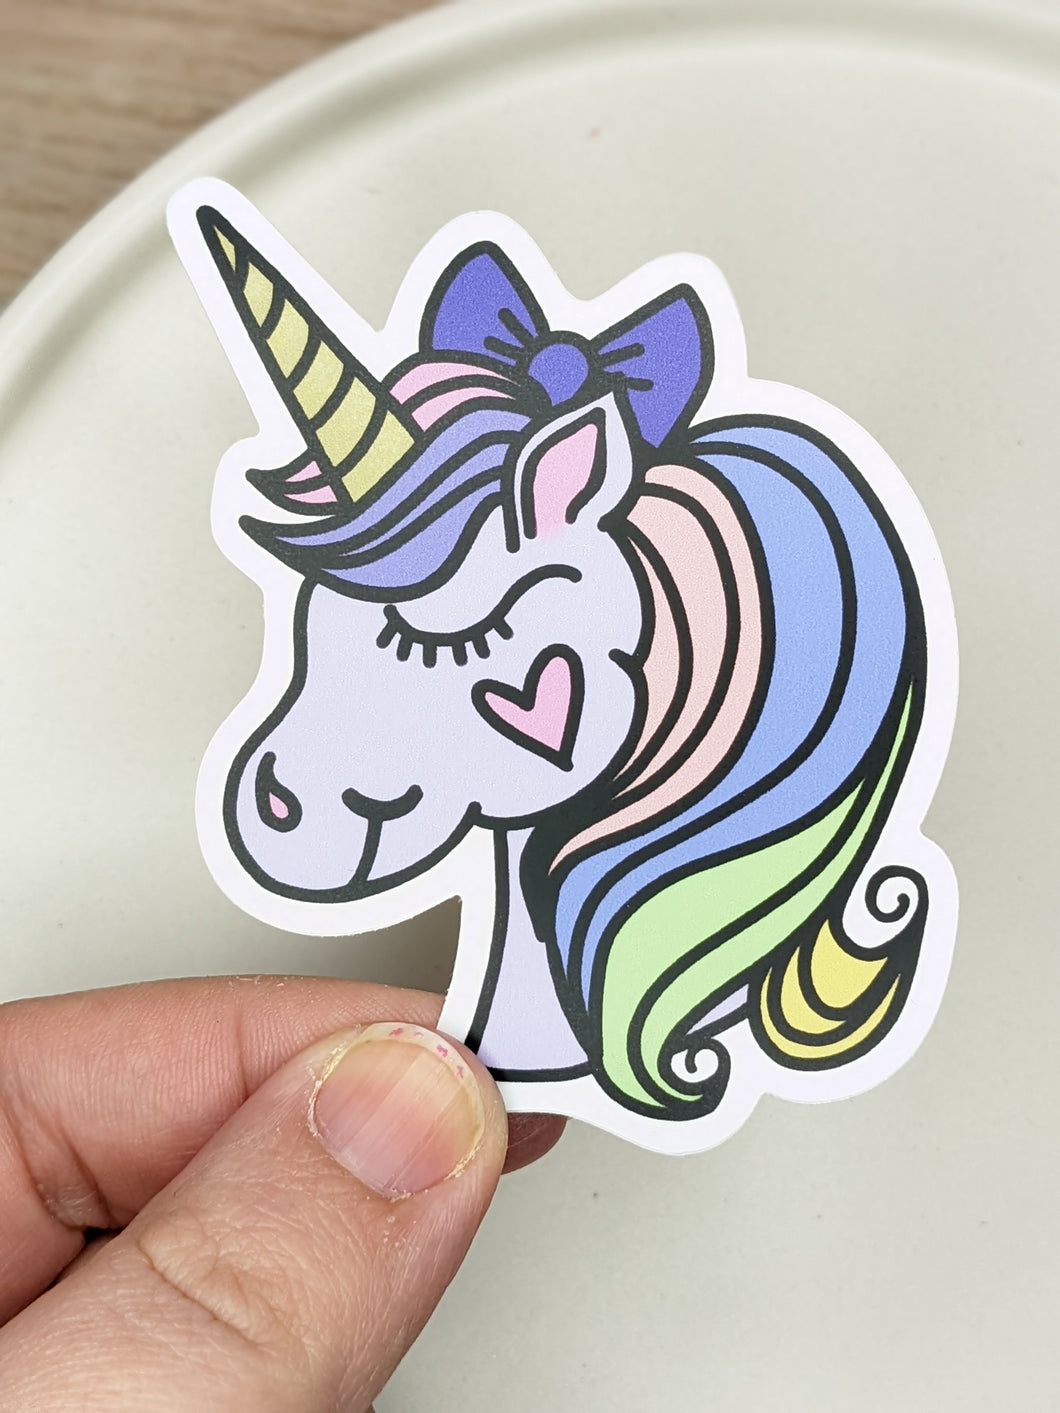 A cartoon style pastel unicorn sticker is being held over a white dish with a wooden background